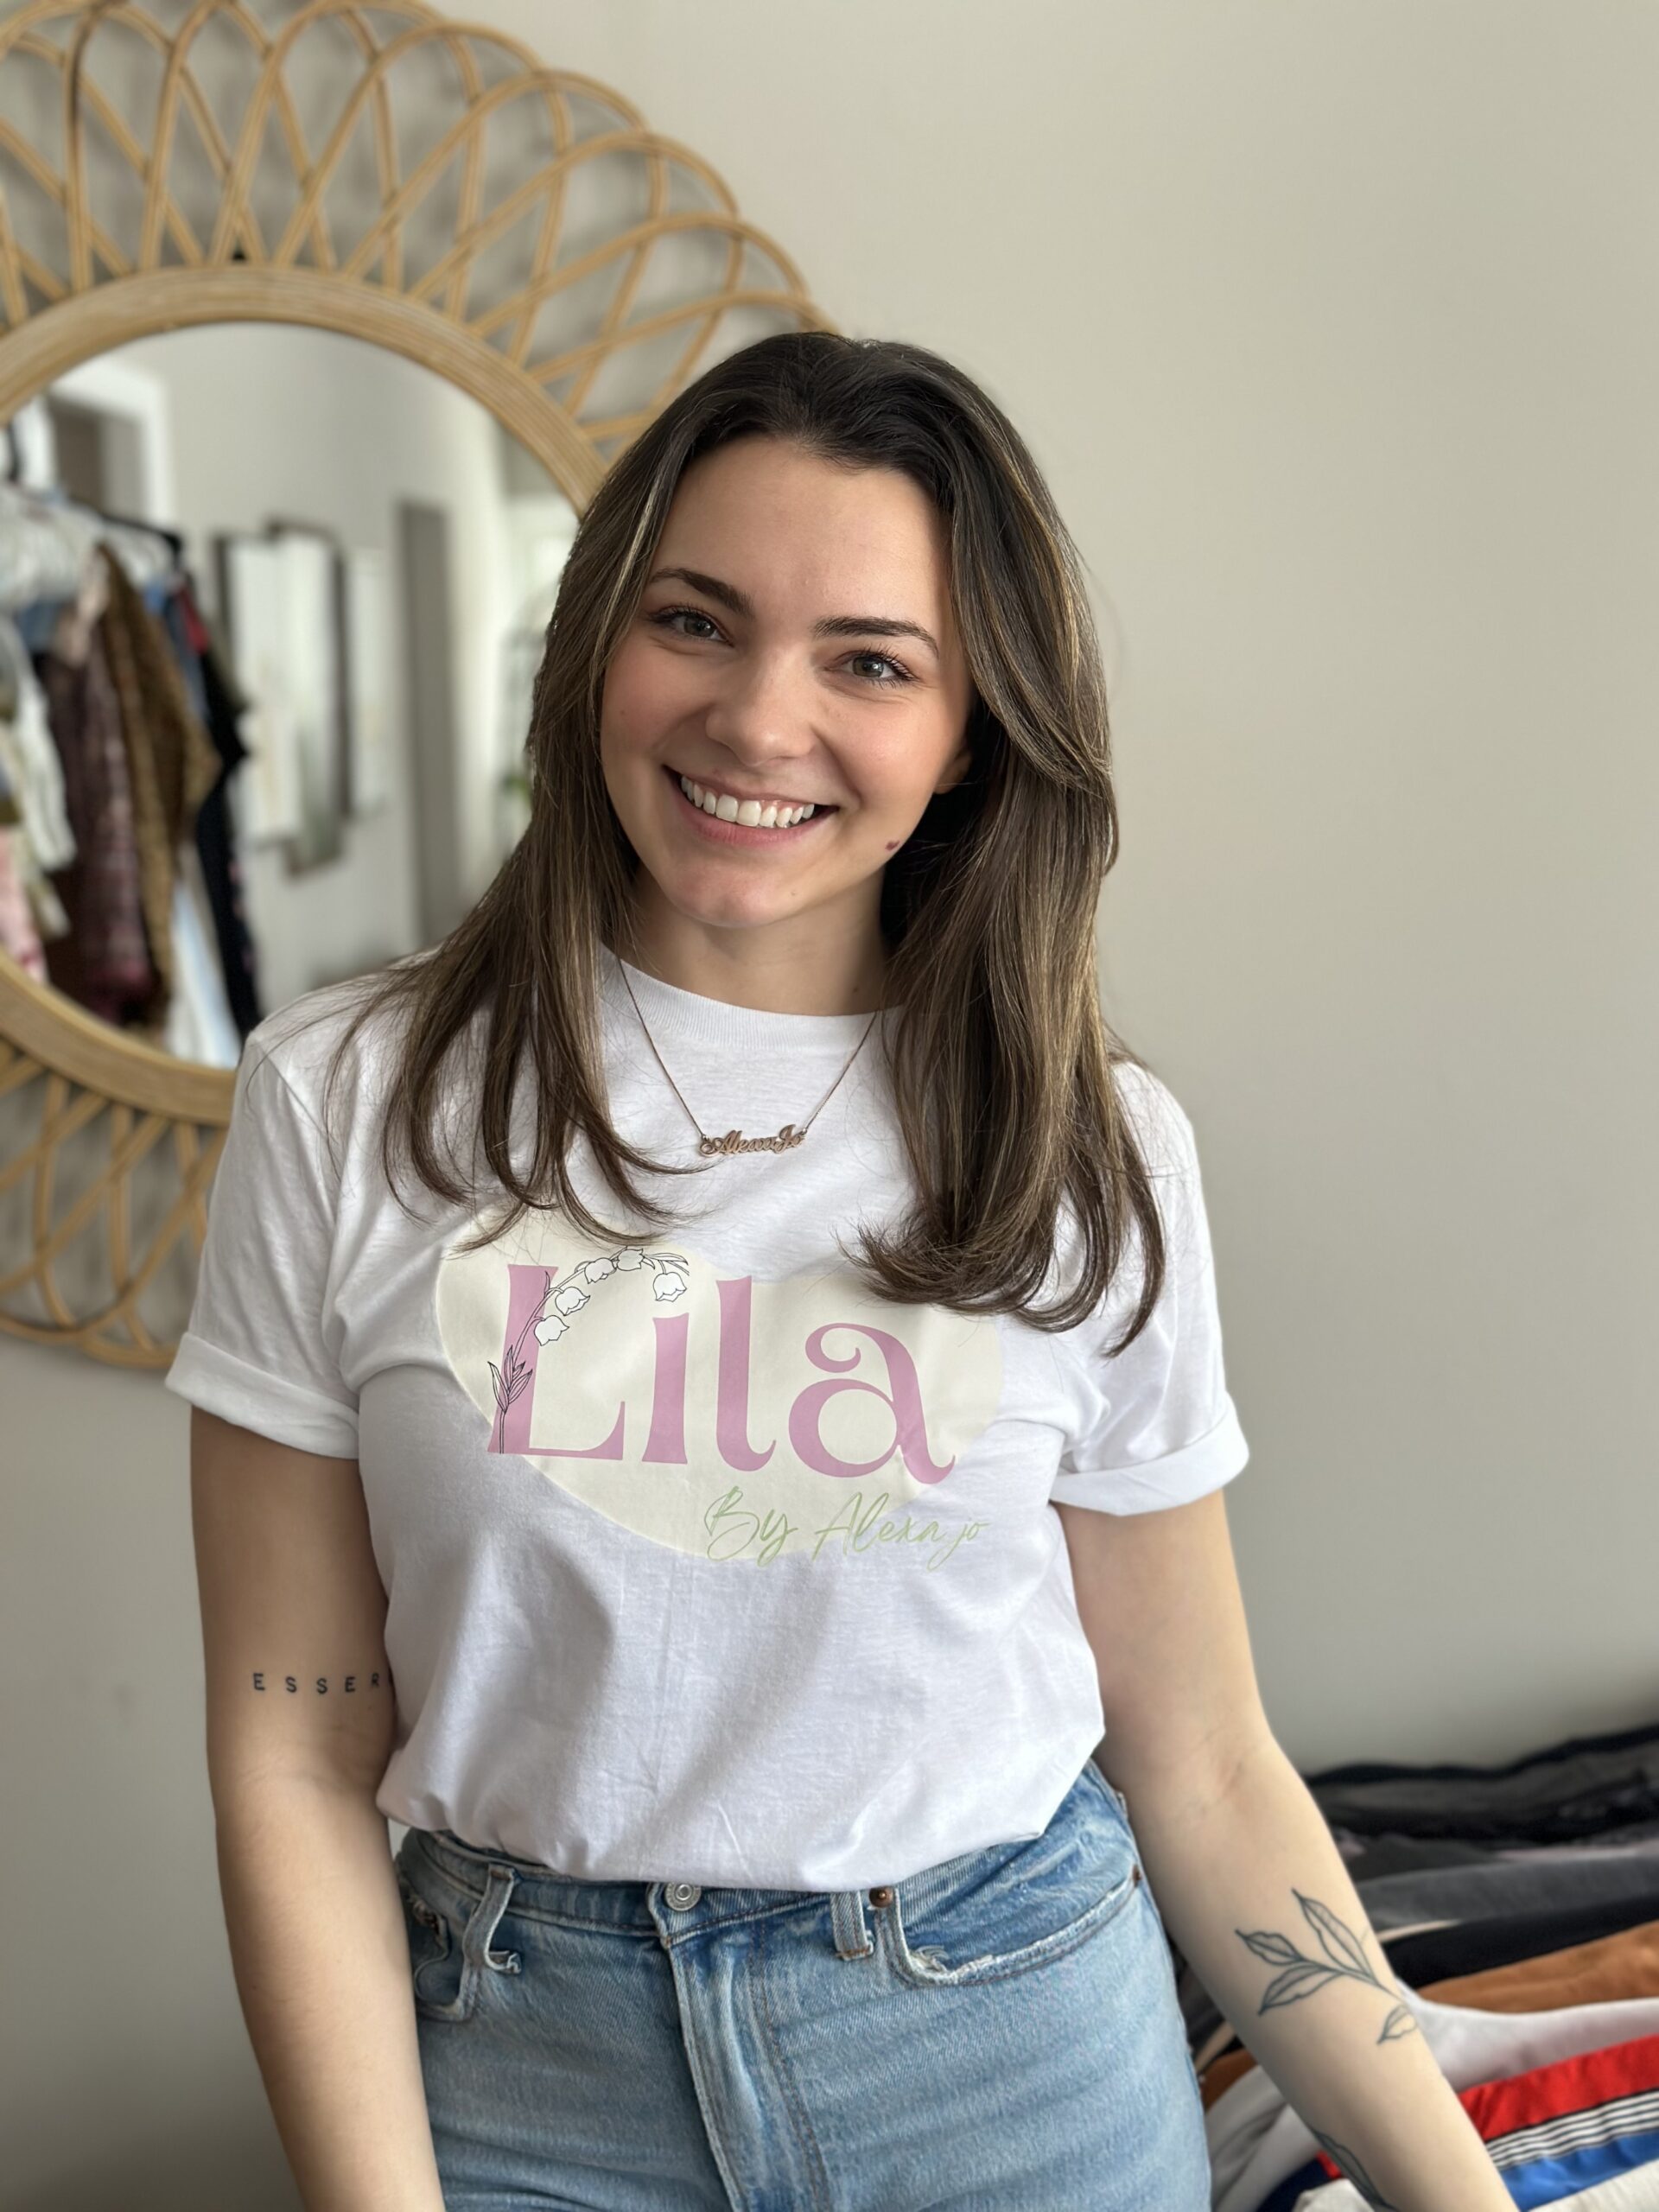 A woman wearing a t - shirt that says lila.